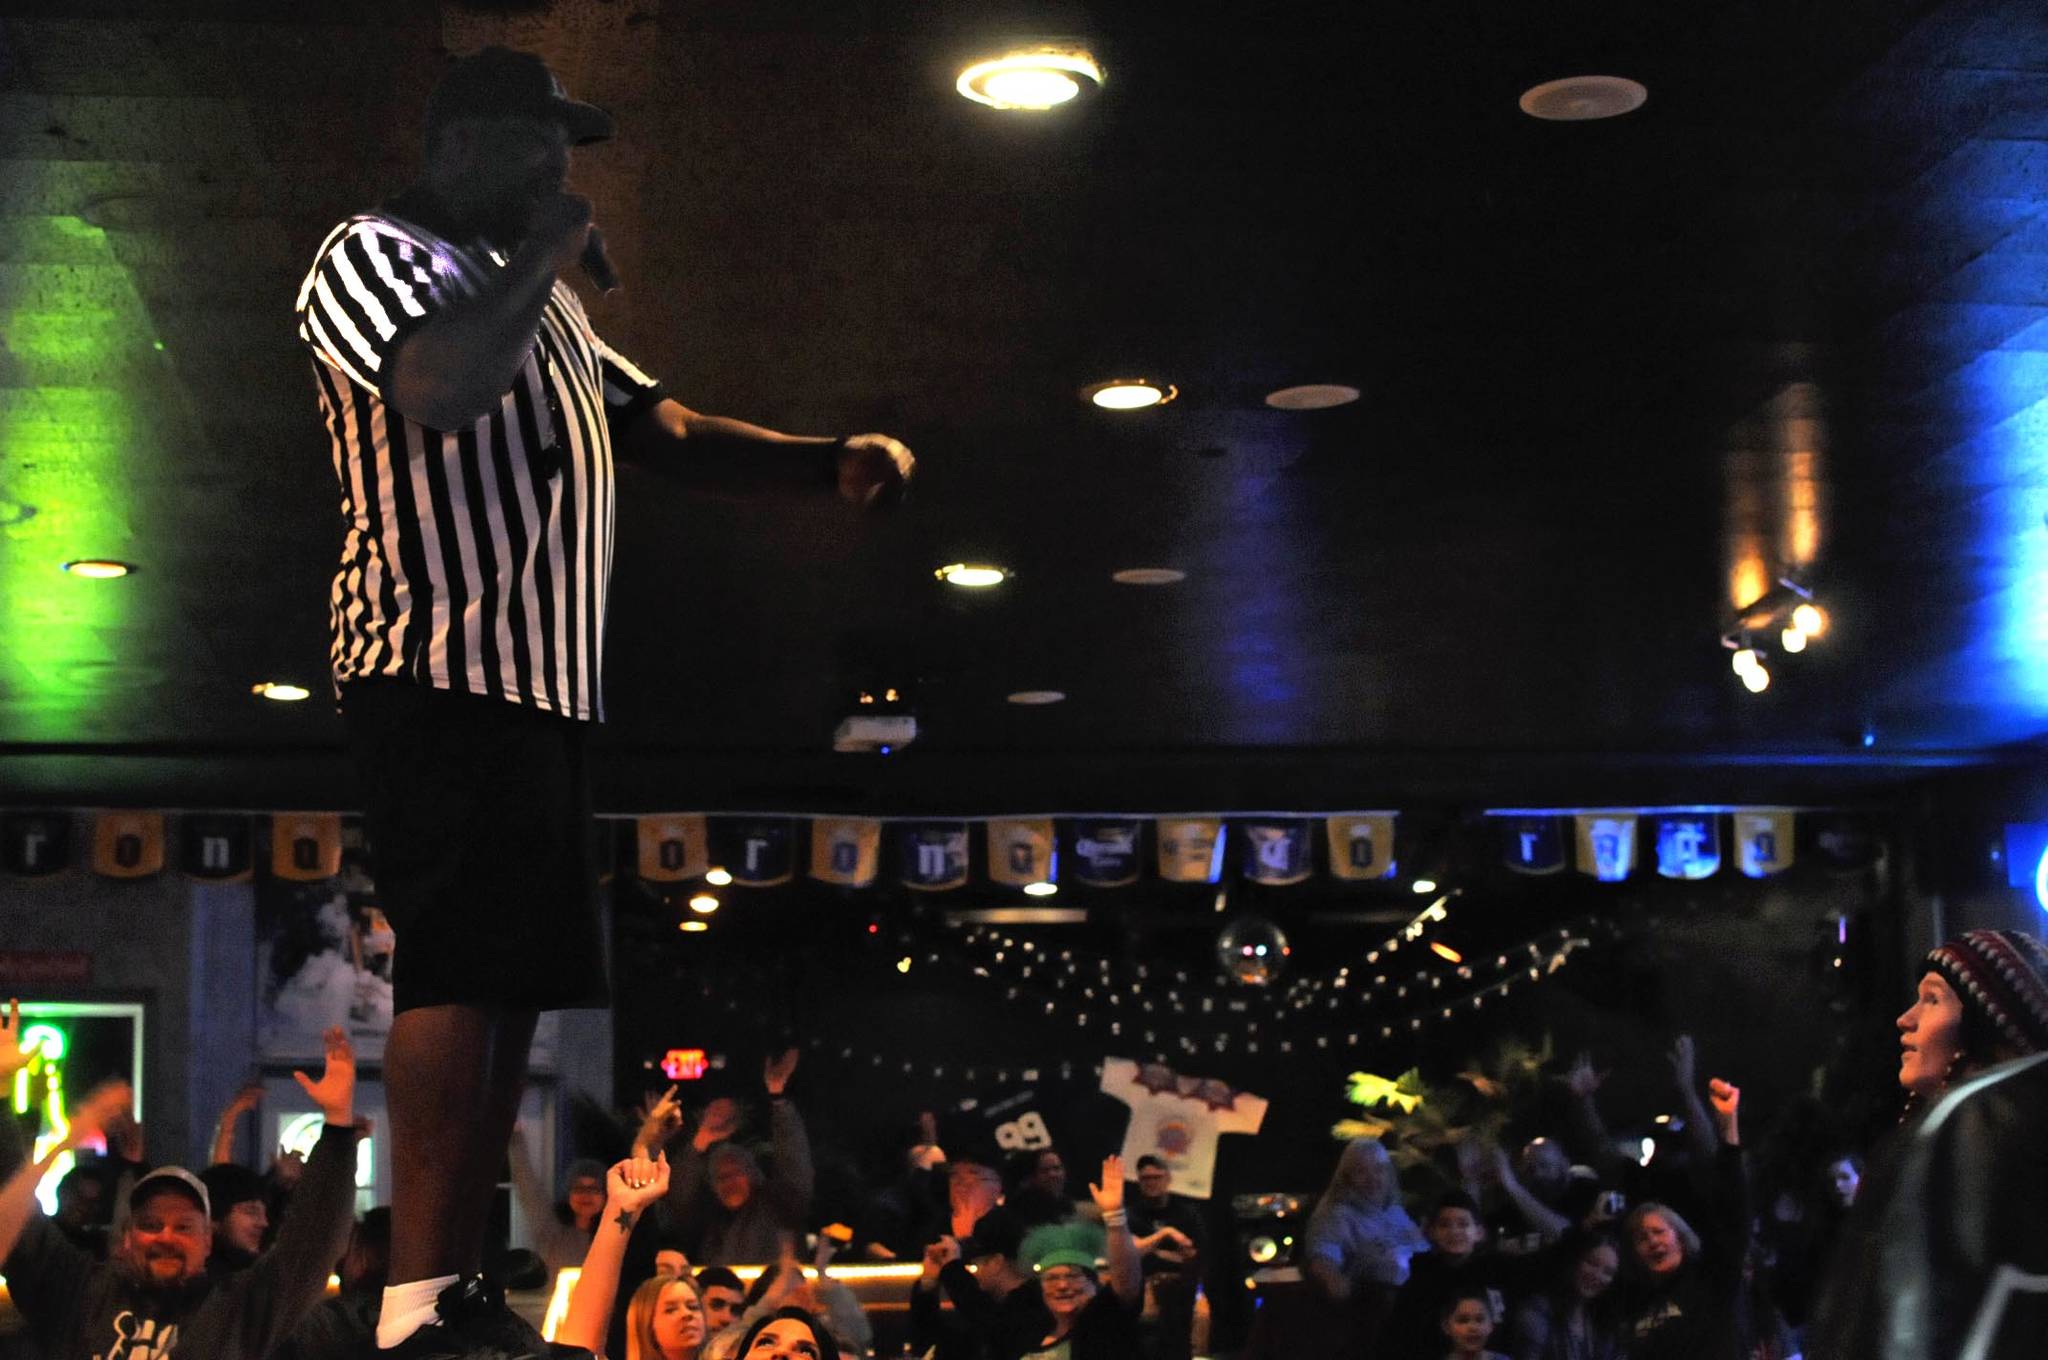 Harris “Biz” Richardson, a bartender at the Main Street Tap and Grill, draws a cheer from the crowd gathered at the restaurant for the Superbowl on Sunday, Feb. 4, 2018 in Kenai, Alaska. The New England Patriots and the Philadelphia Eagles battled it out in Minnesota for the Superbowl LII title Sunday, with the Eagles triumphing 41-33. Football fans packed bars like the Main Street and the Back Door Lounge in Kenai on Sunday to watch the game, and the bars hosted parties and giveaways in response. The Back Door drew tickets for T-shirts and the Main Street hosted a Super Bowl Party sponsored by Corona with a giveaway with a theater recliner as the grand prize. (Photo by Elizabeth Earl/Peninsula Clarion)